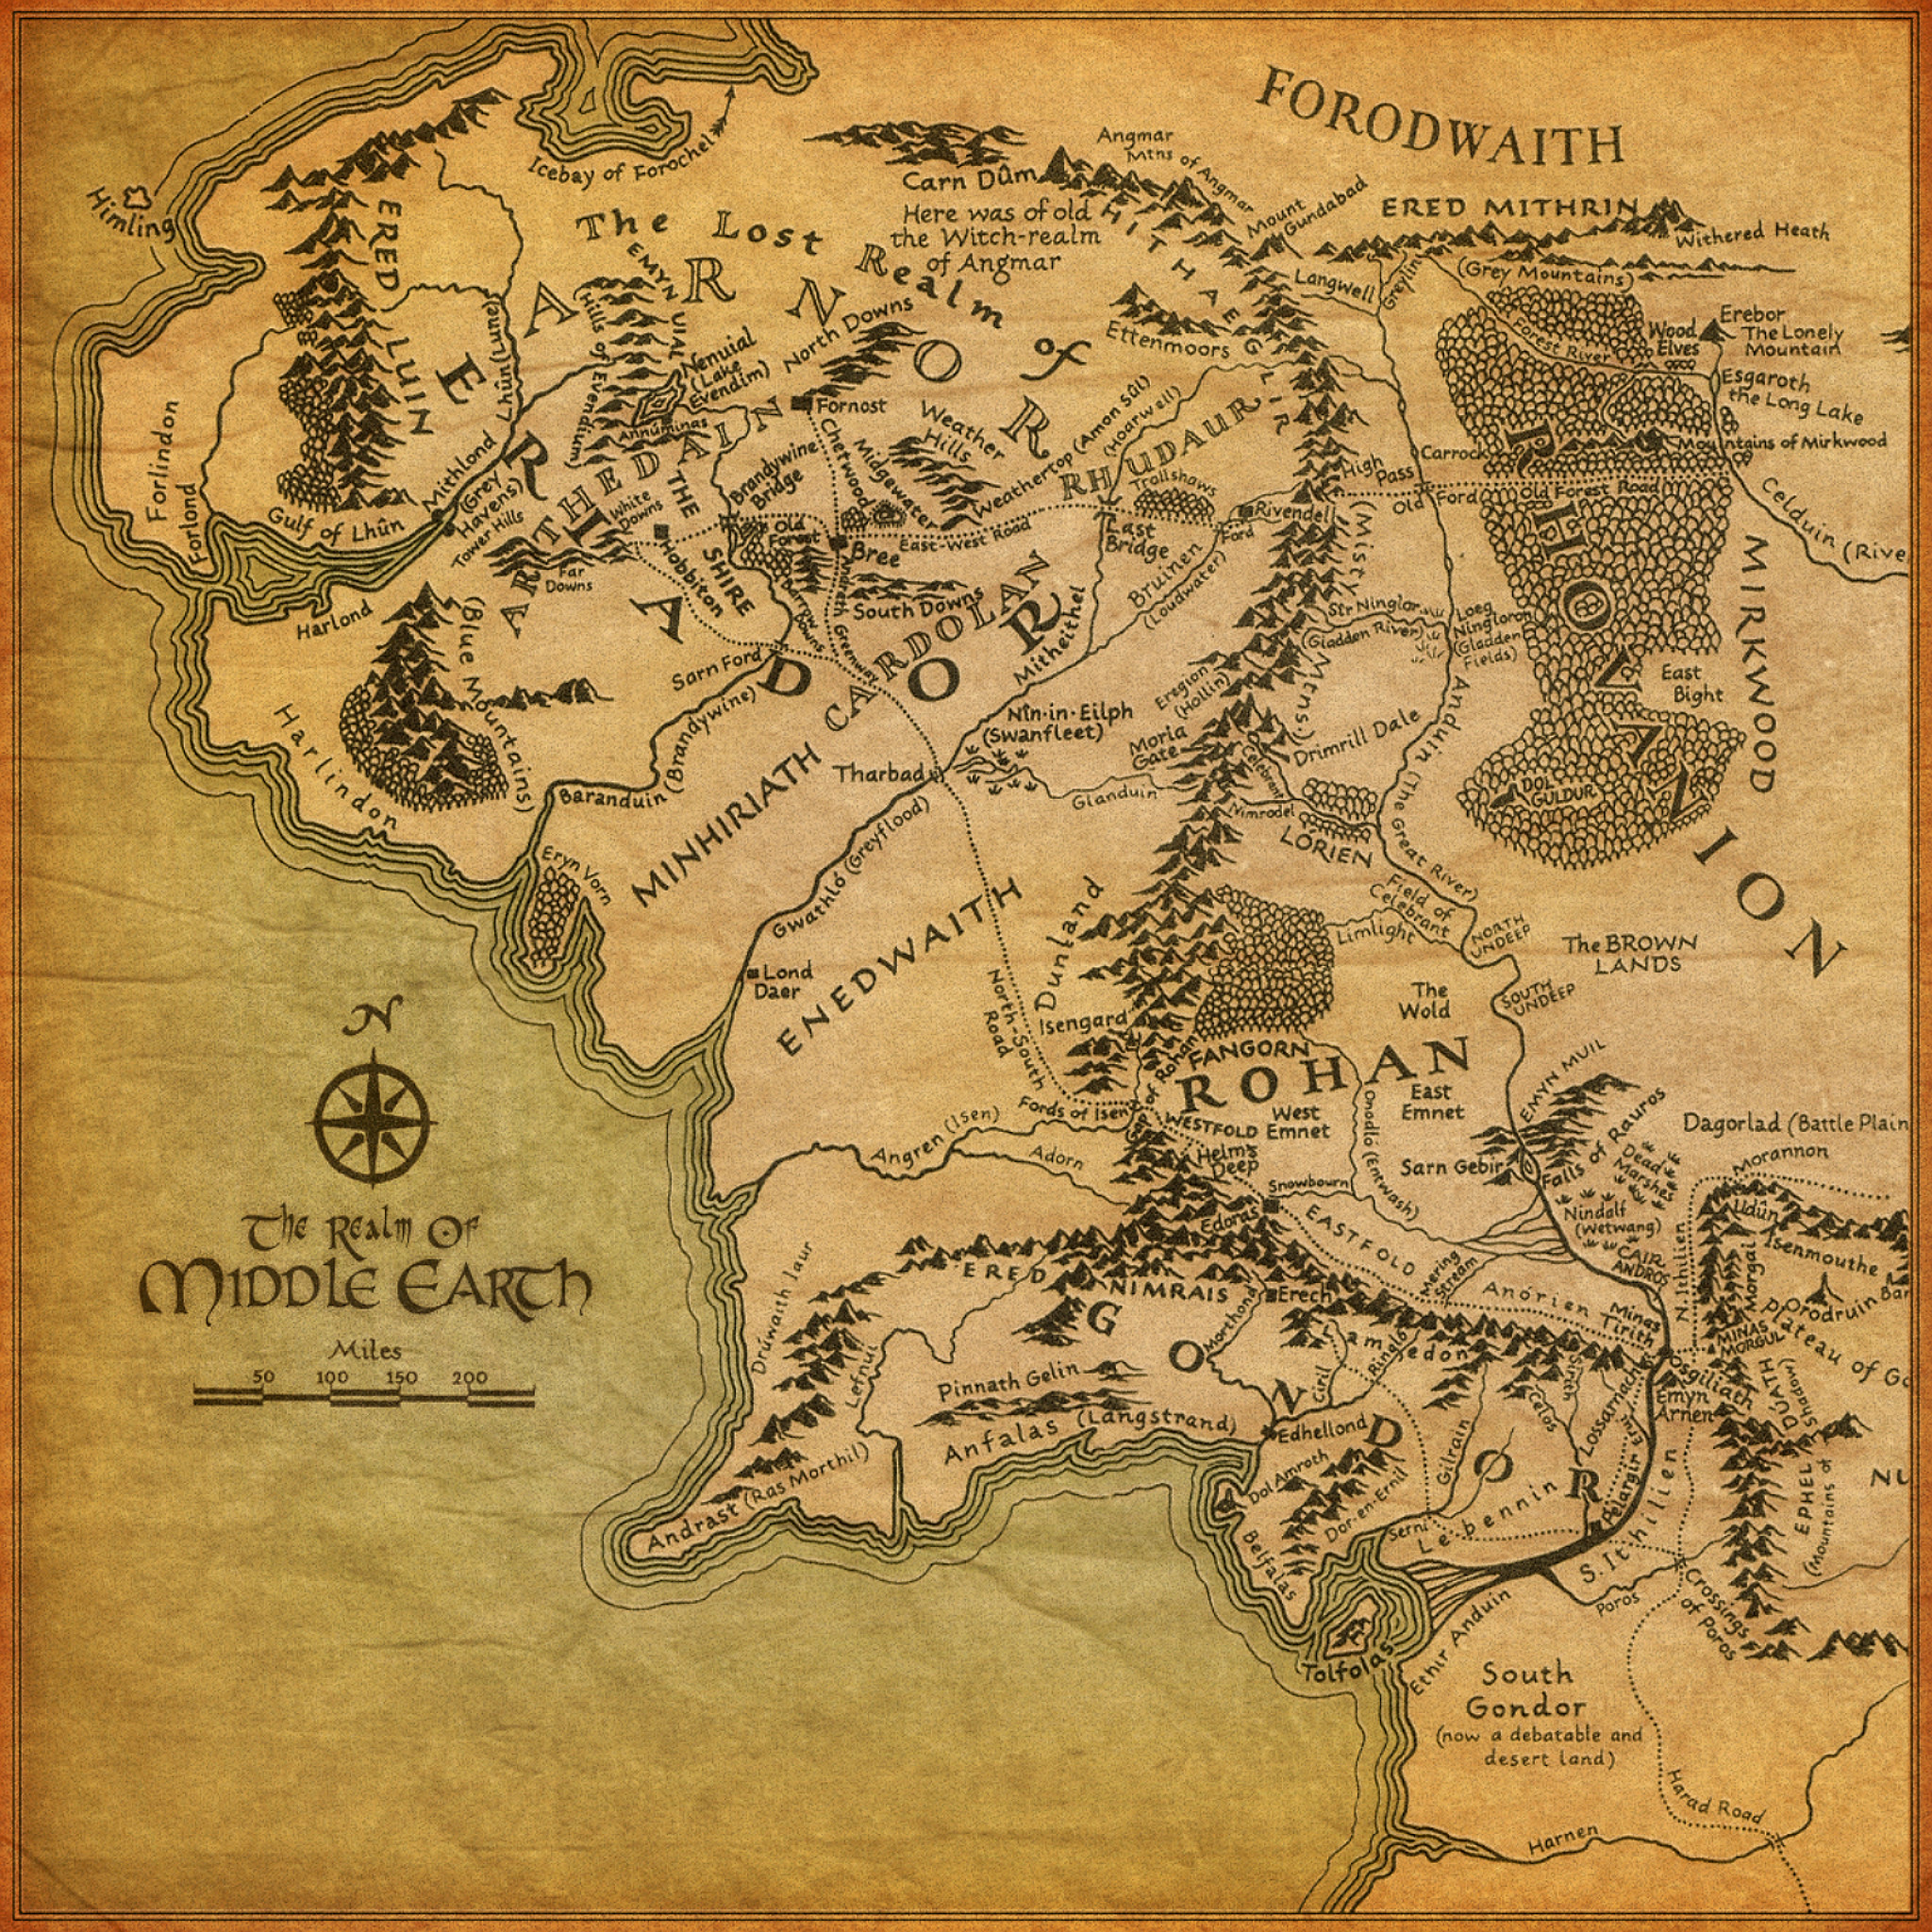 Maps For Map Of Middle Earth Iphone Wallpaper Ipad タブレット壁紙ギャラリー